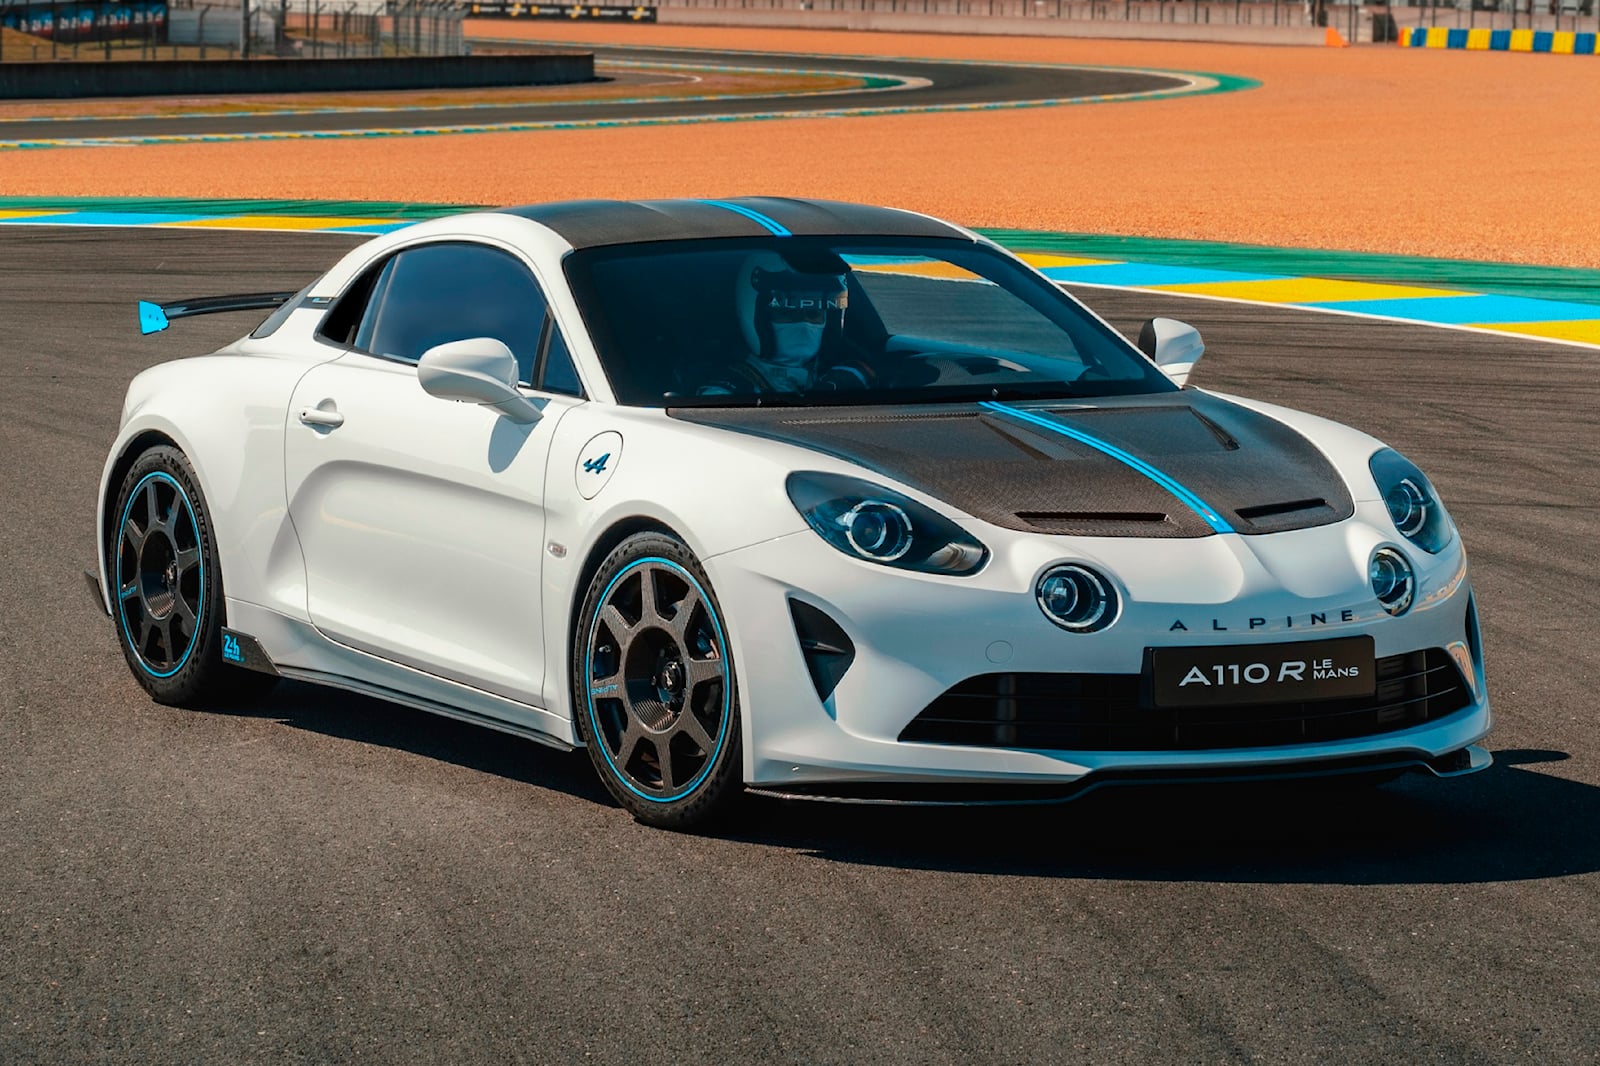 Alpine A110 R Le Mans Is A Limited Edition Tribute To The World's